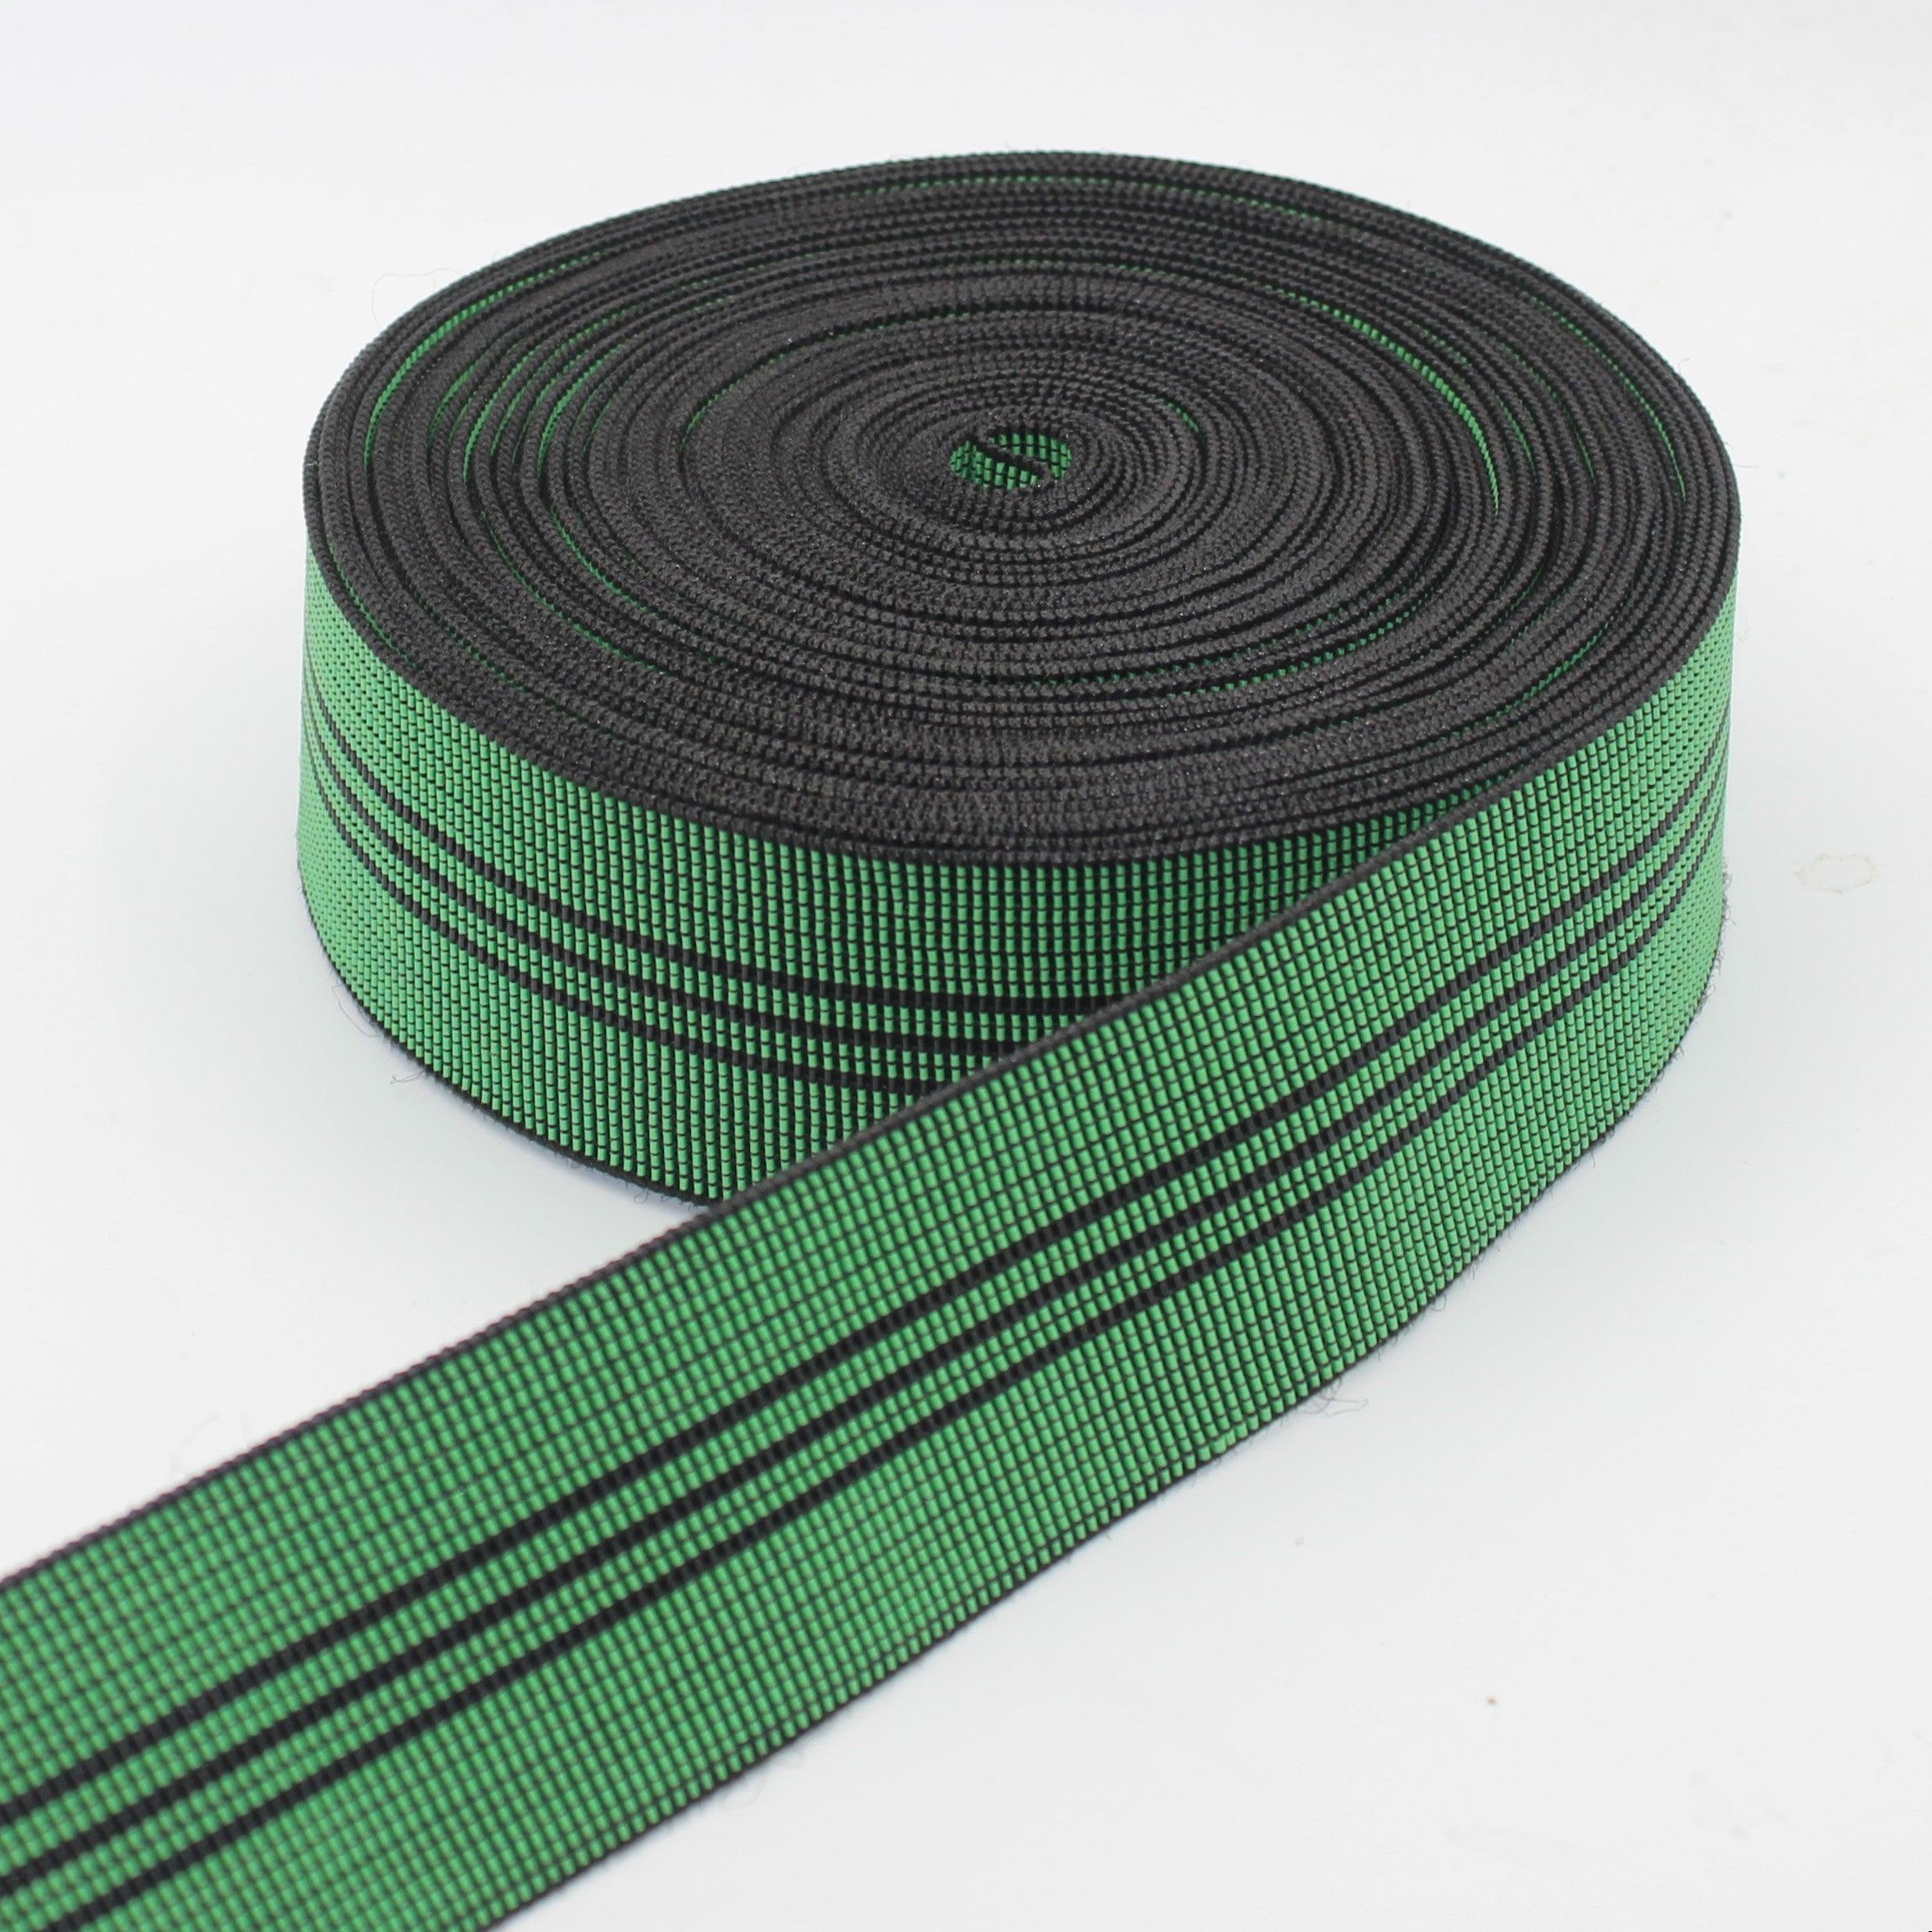 Sofa Elastic / Home Furnishing / Chairs - Green & Black - Very Strong #ELA2979 - 3 meters - ACCESSOIRES LEDUC BV